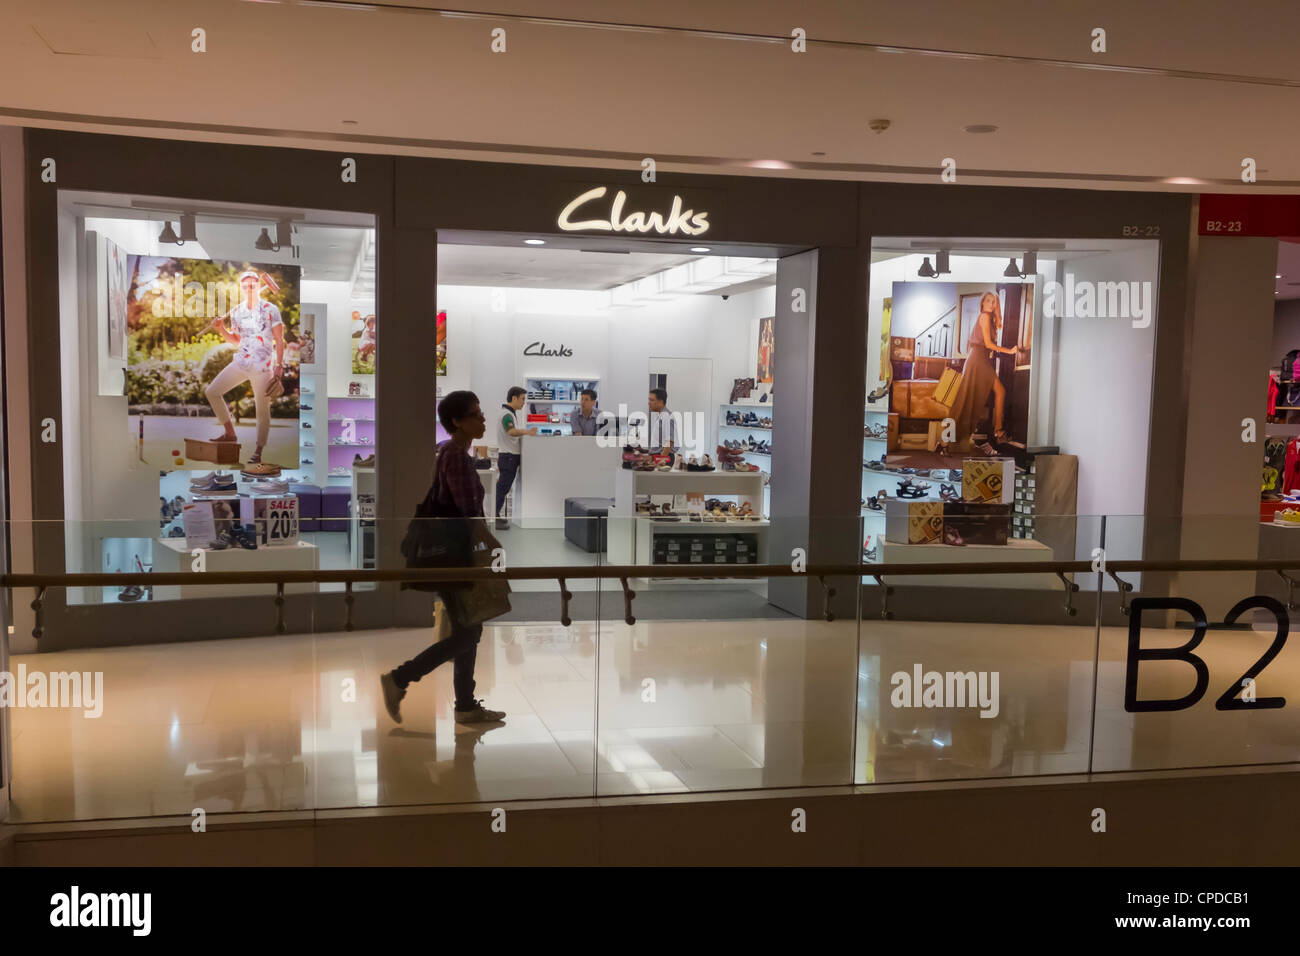 Clarks shoe store in Wheelock Place on Orchard Rd Singapore Stock Photo -  Alamy